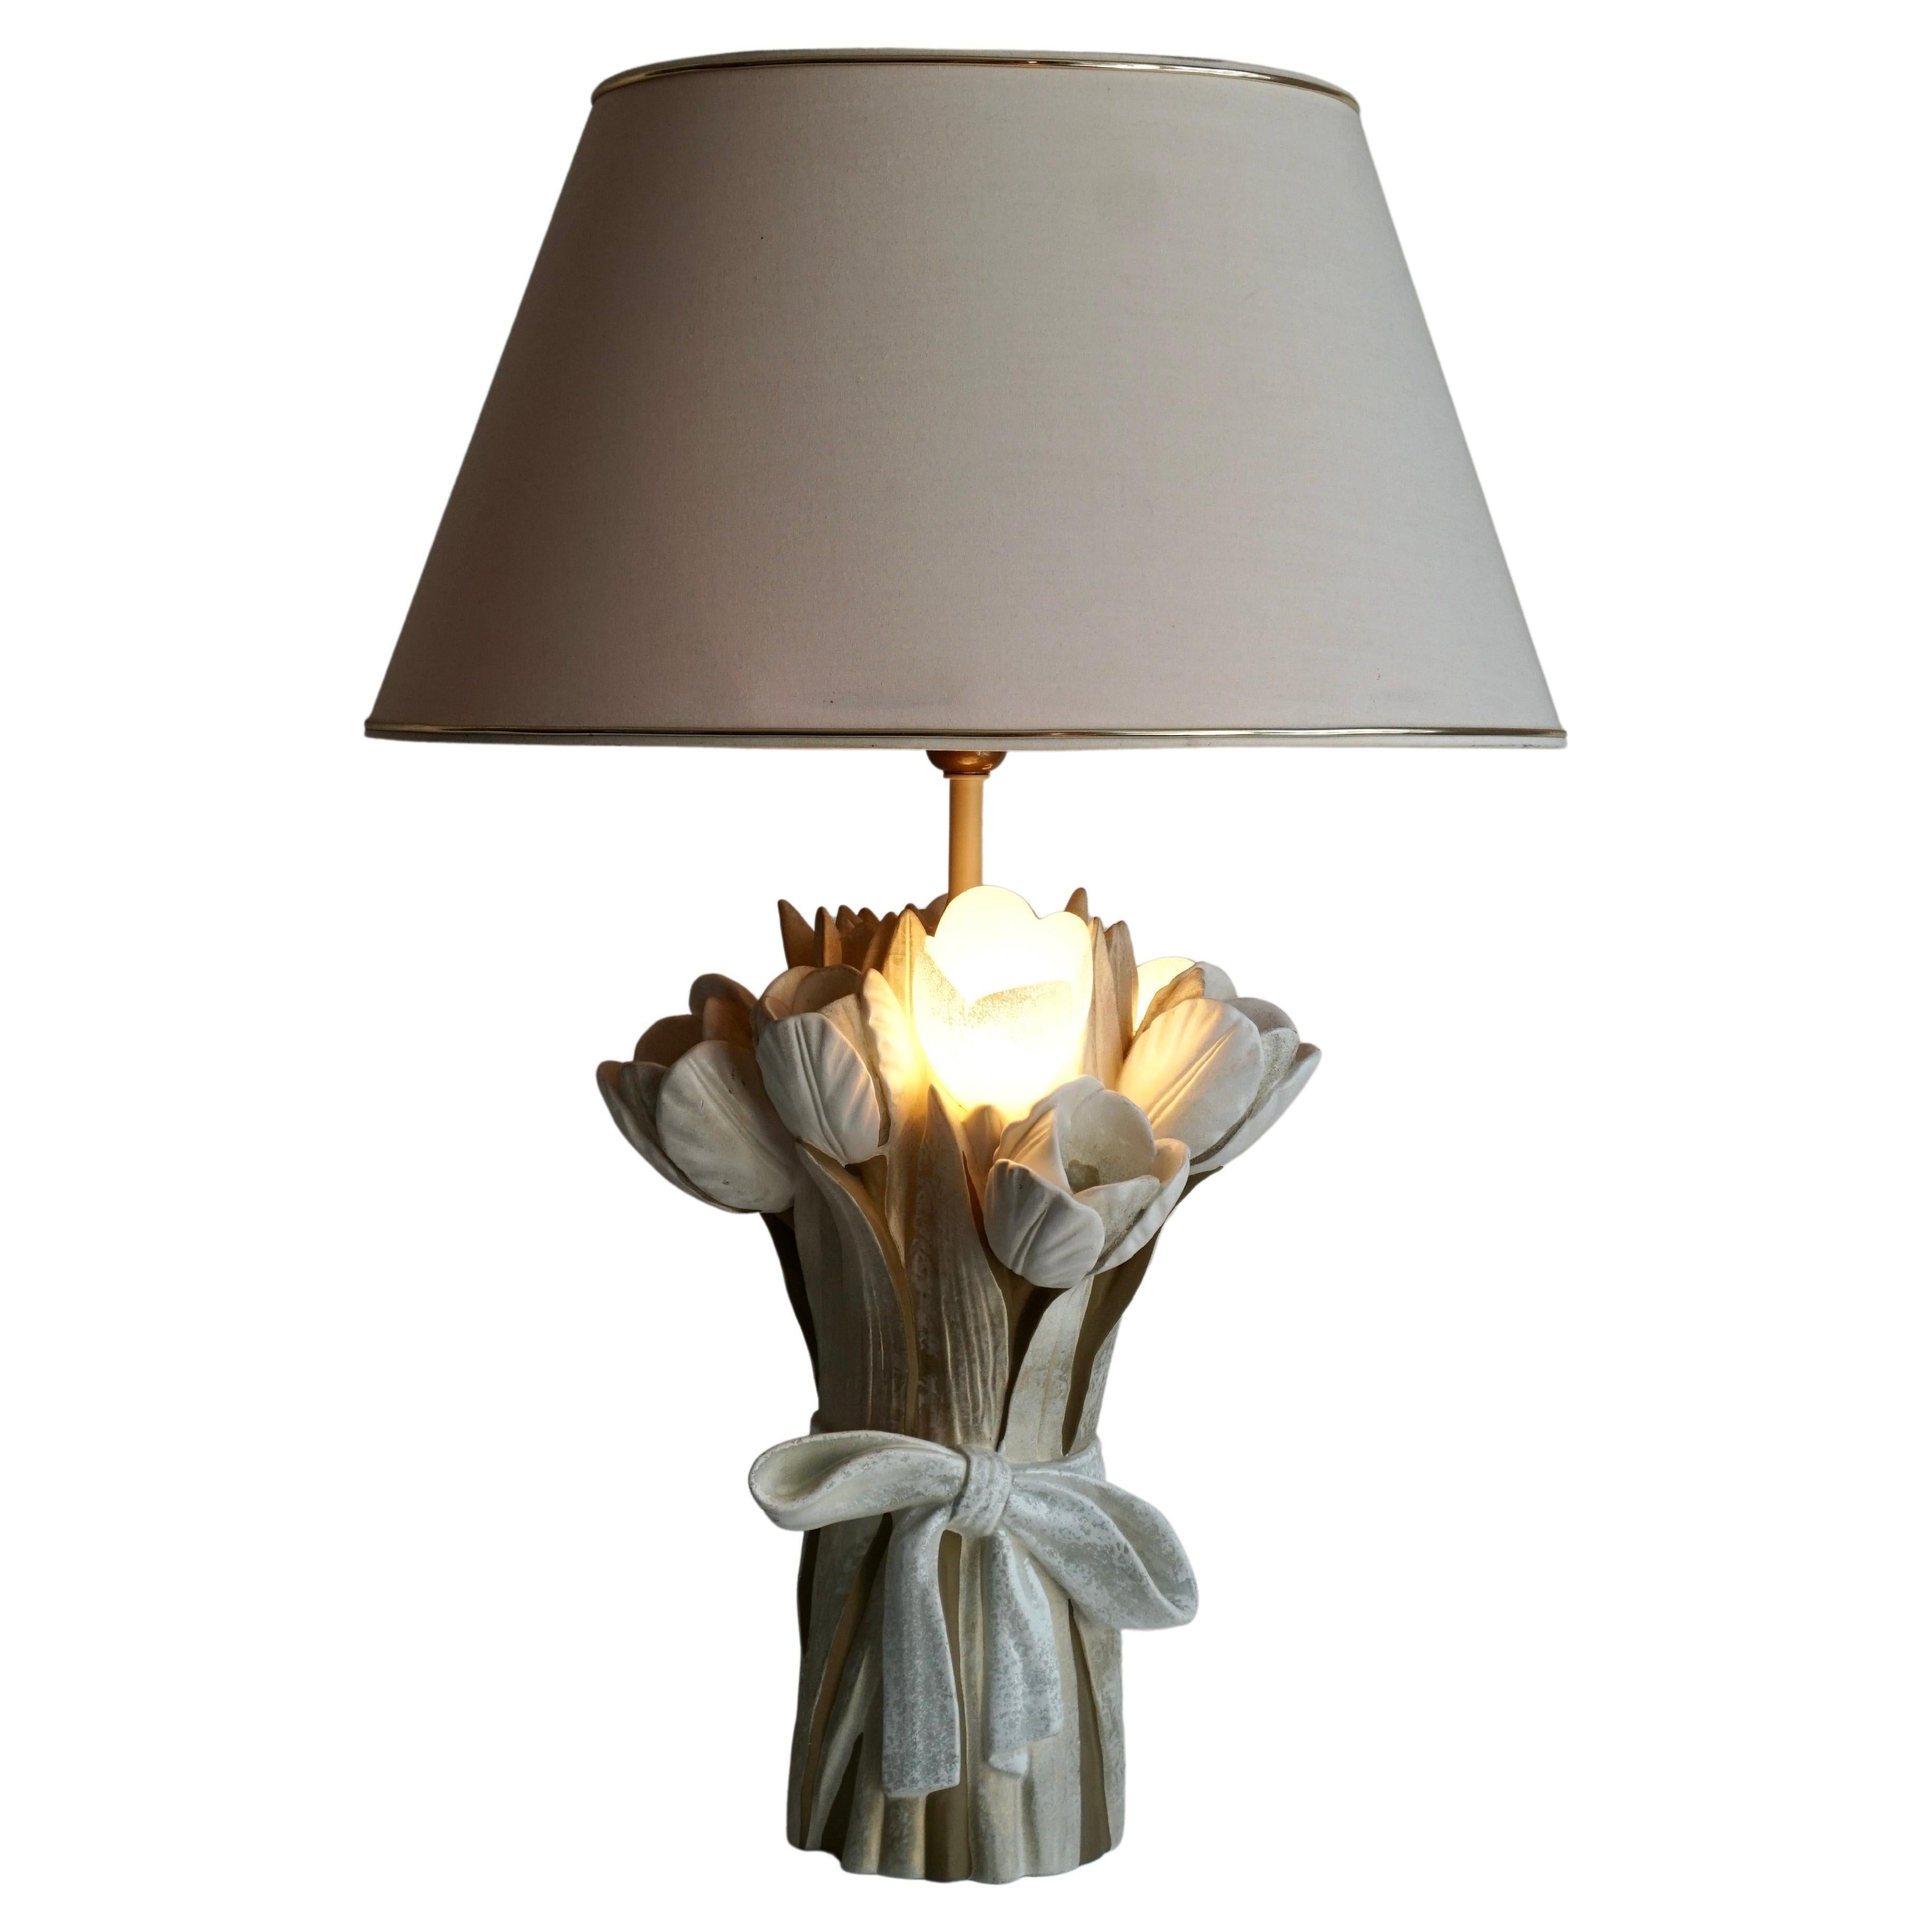 Ceramic dining table lamp in the shape of a bunch of tulips.

Height with shade 28.7